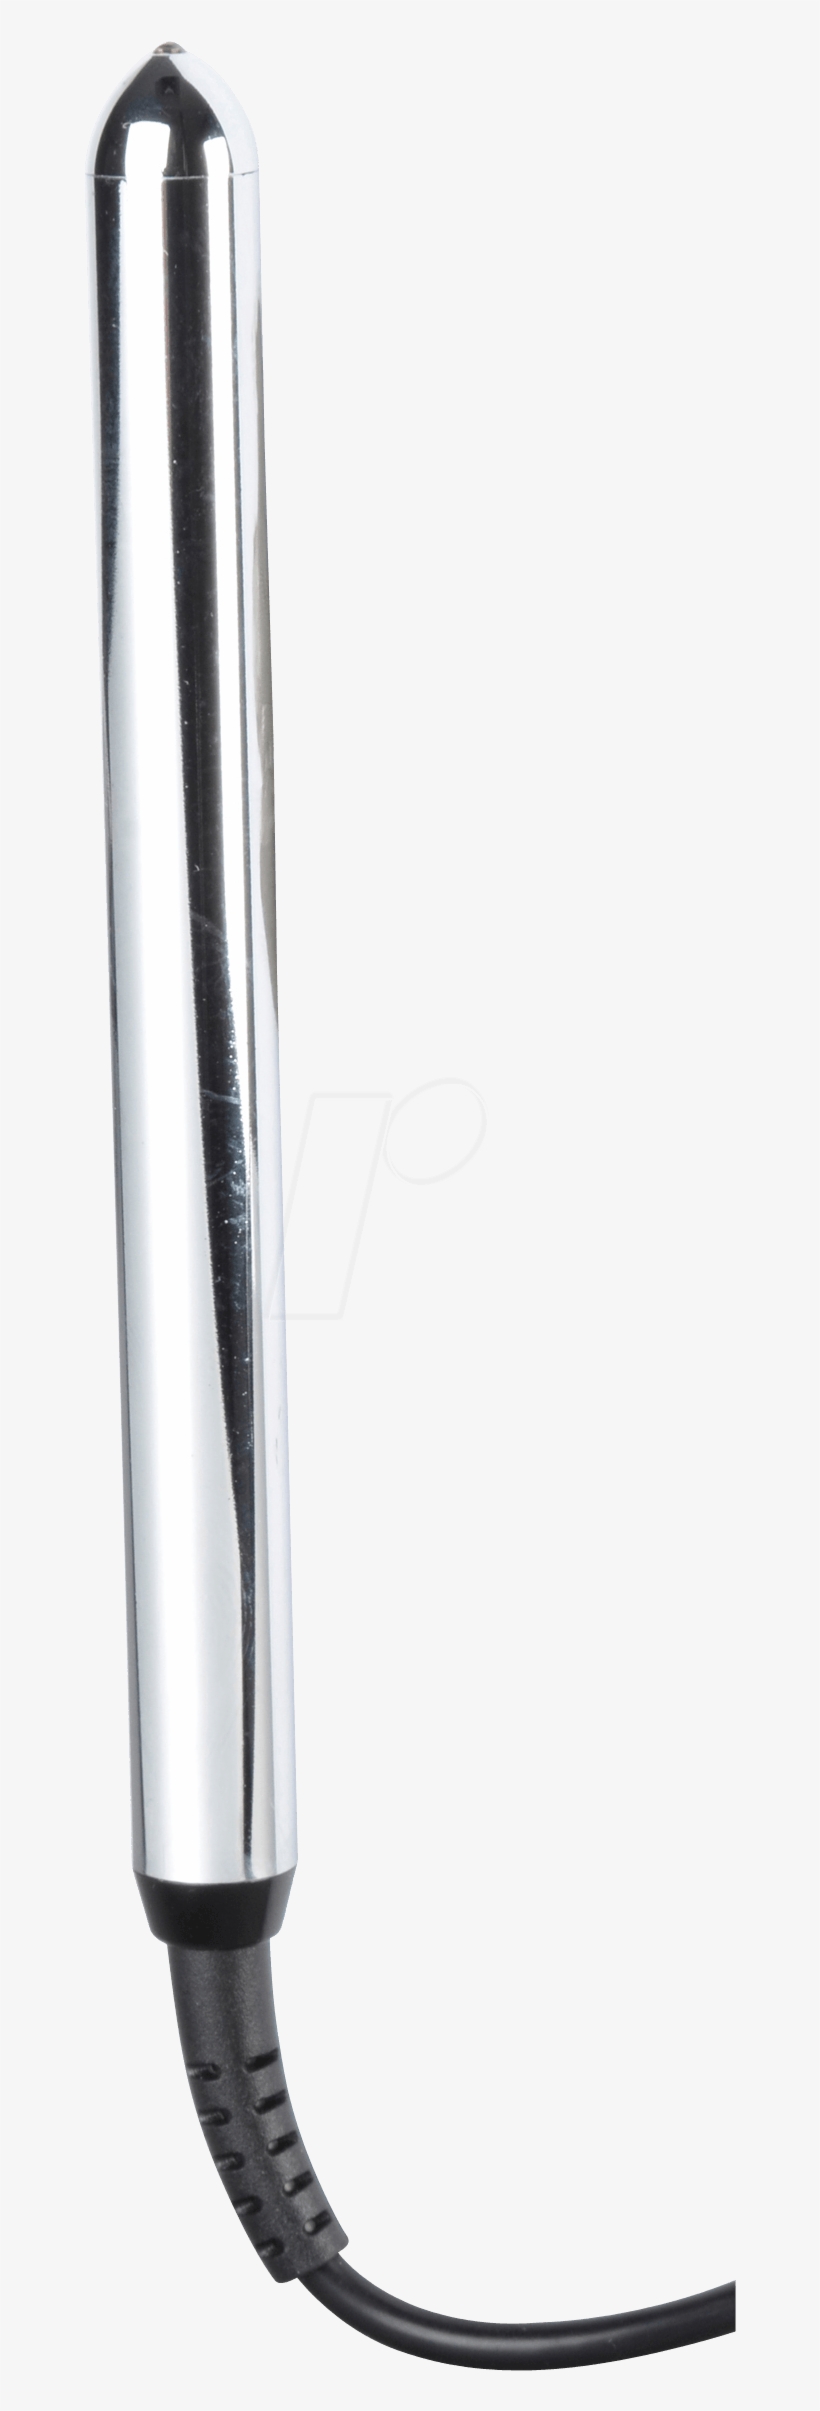 Wand Barcode Scanner Type Ii, Metal Version - Old Barcode Scanner Wand, transparent png #9333199